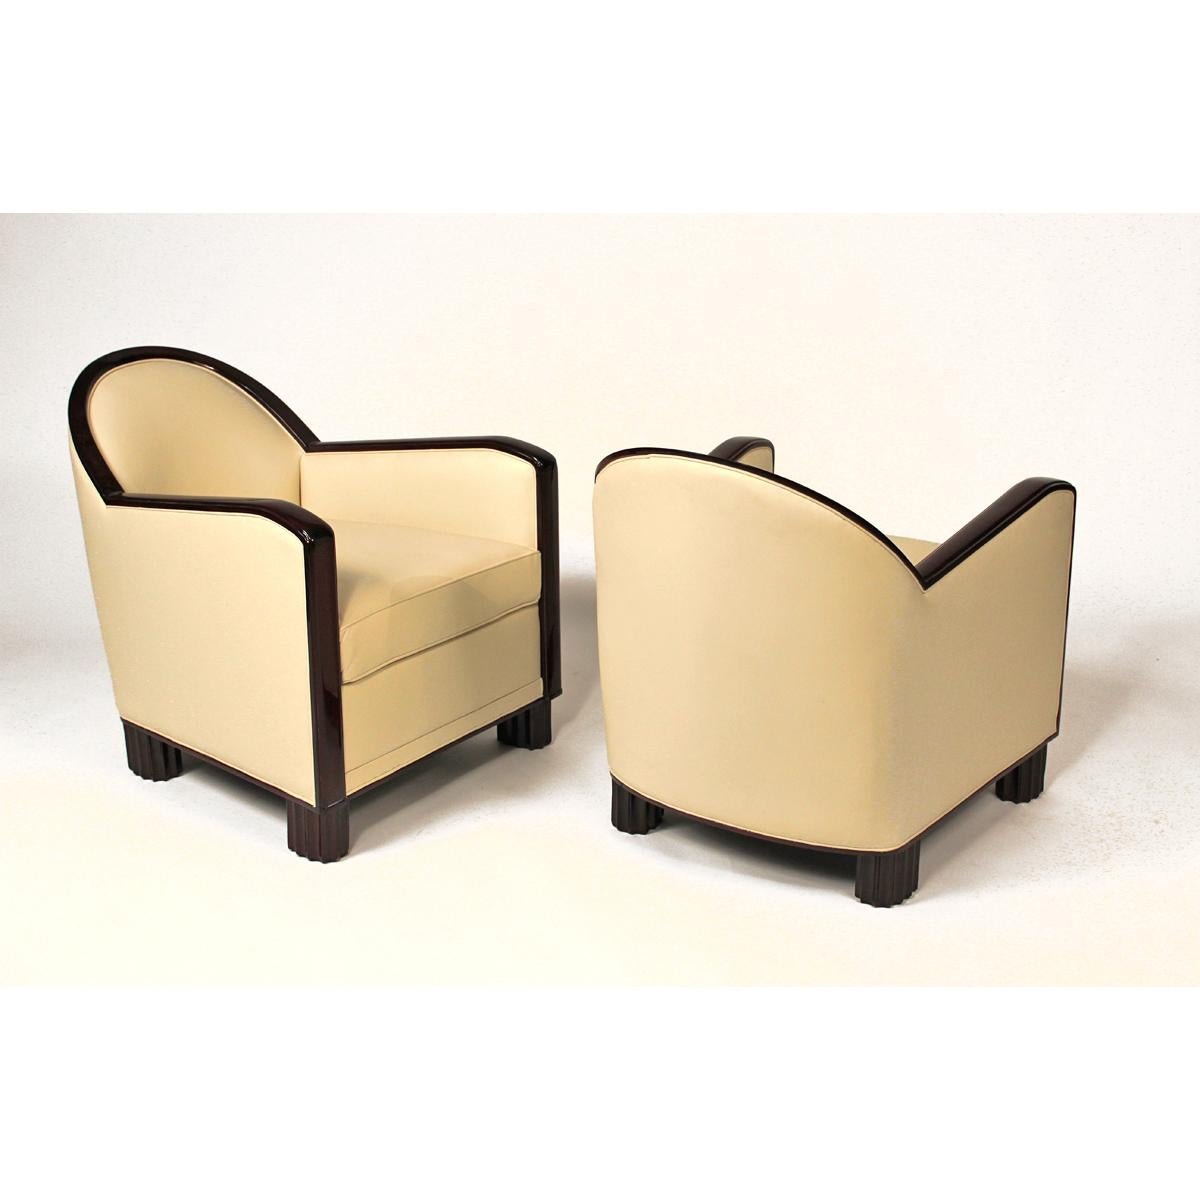 A pair of rosewood Art Deco chairs designed by DIM (Joubert et Petit).
Made in France,
circa 1935

Decoration Interieure Modernes (DIM)
The firm was established in 1919 by Rene Joubert who was trained as an architect before moving to the